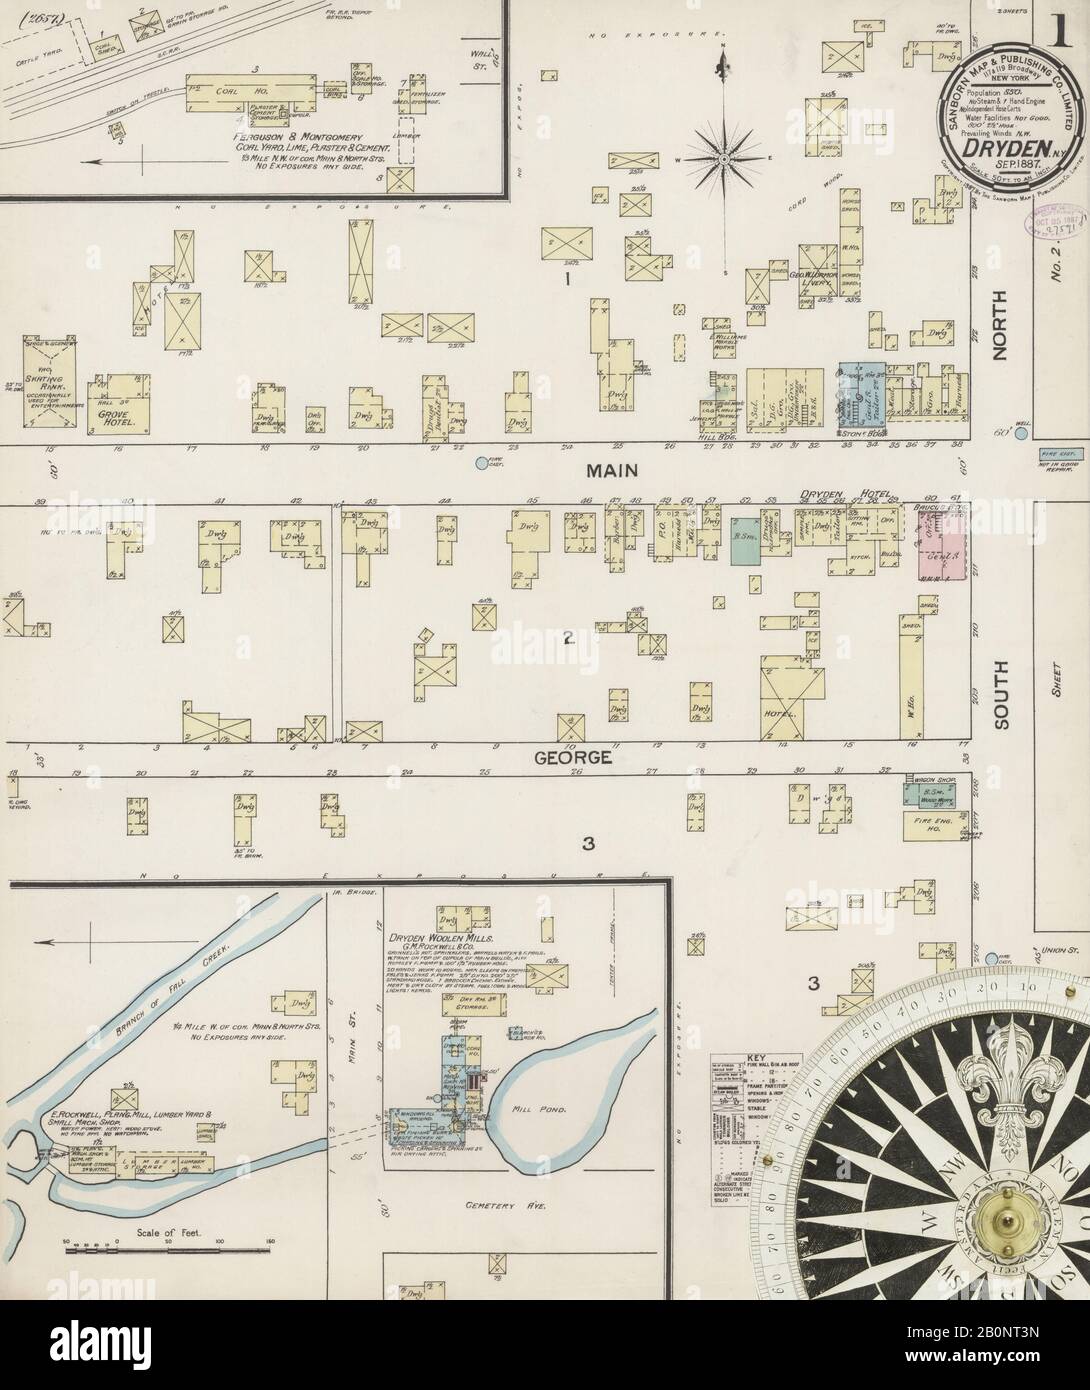 Image 1 of Sanborn Fire Insurance Map from Dryden, Tompkins County, New York. Sep 1887. 2 Sheet(s), America, street map with a Nineteenth Century compass Stock Photo